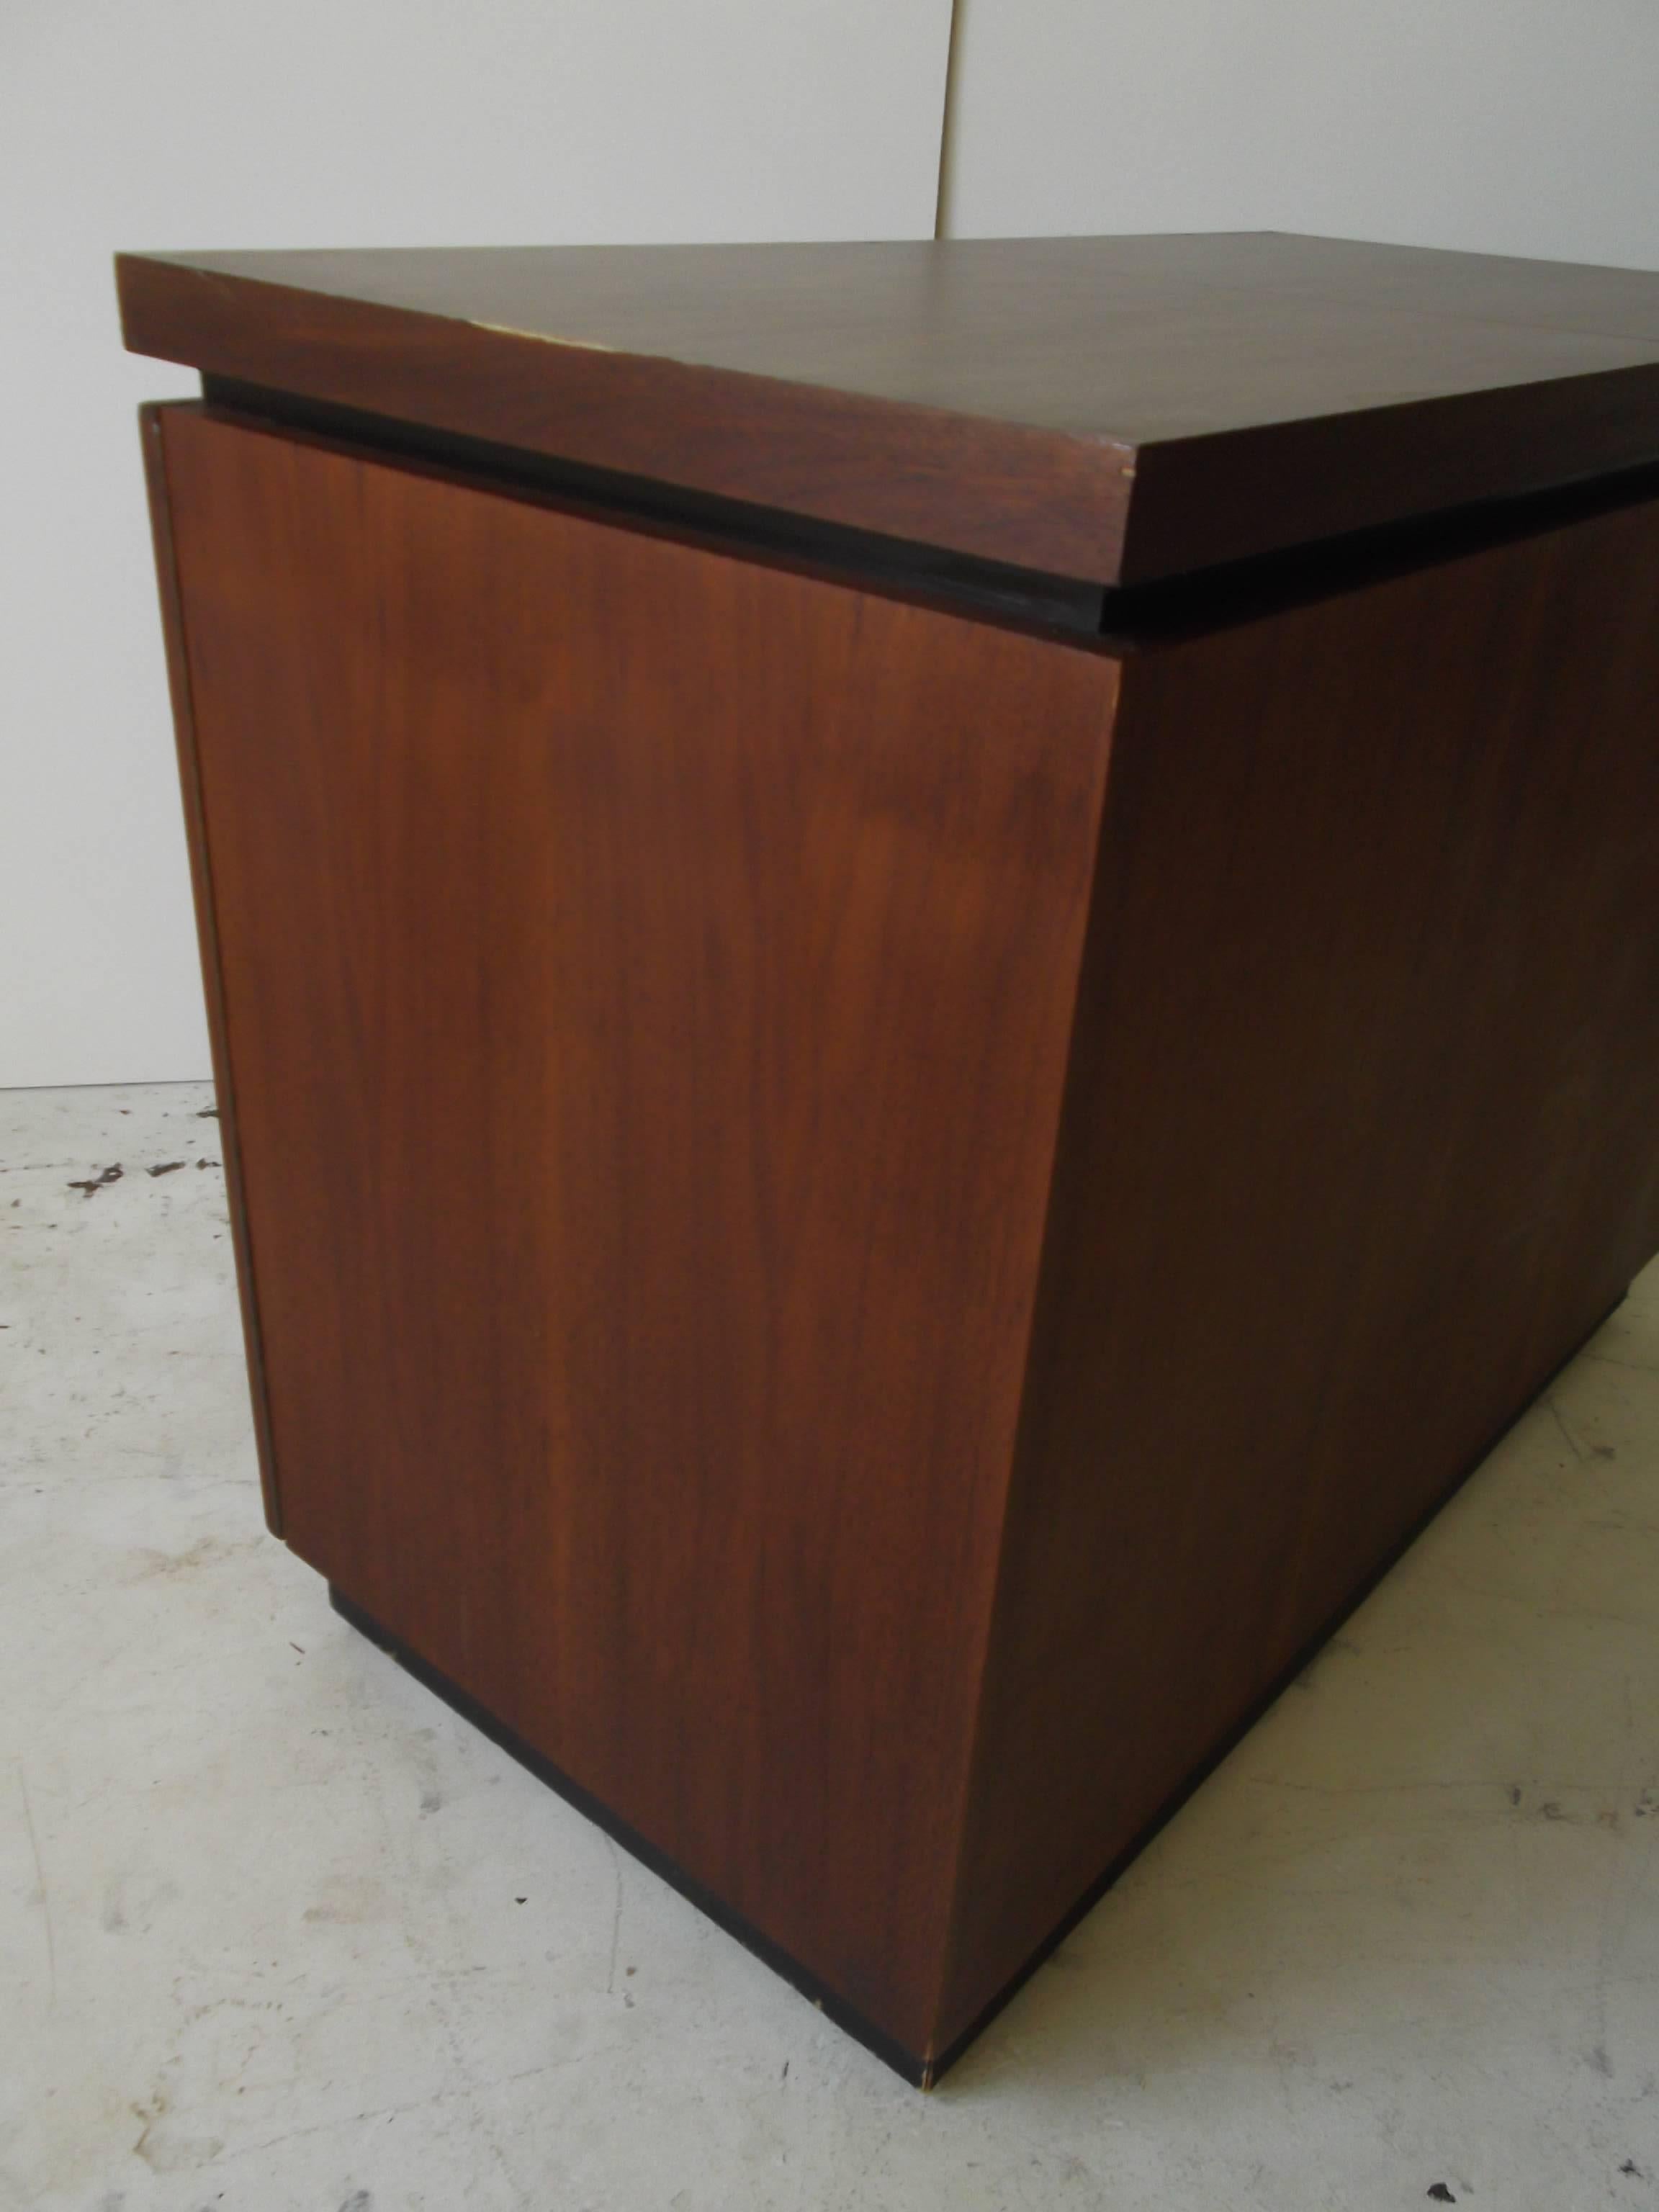 This is a stunning modern bar cart designed by Milo Baughman for Dillingham Furniture. It is in beautiful walnut with nice graining. It has slide open top and front doors, with black and white formica inside, and wood grain formica top for pouring